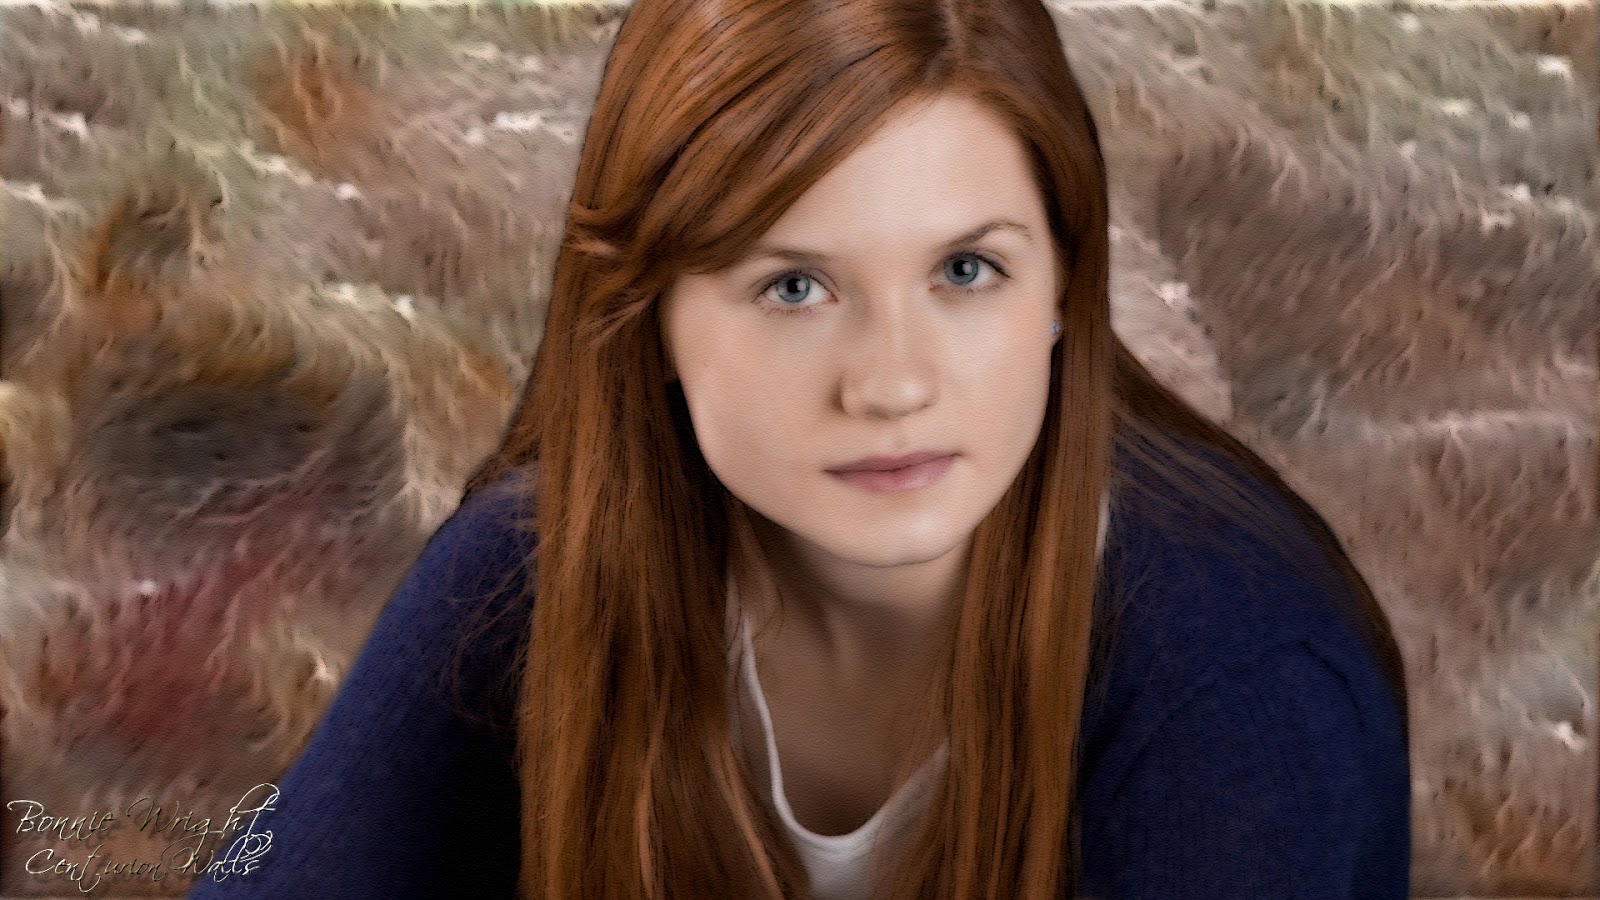 Hot Bio Celebrity Pictures: Bonnie Wright Wallpapers1600 x 900